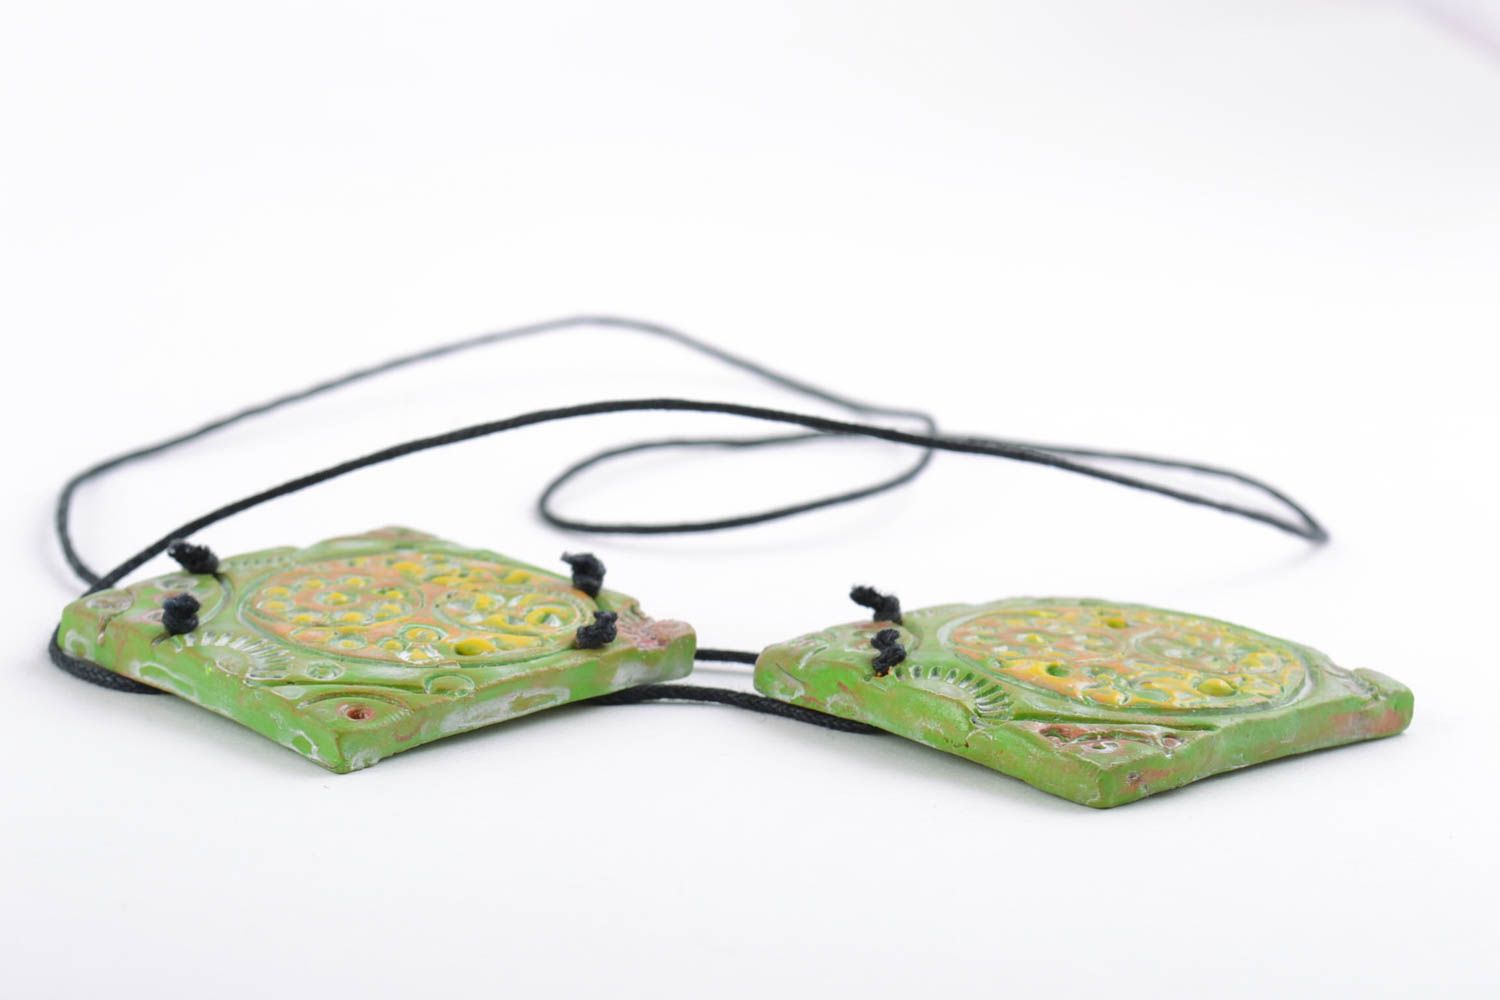 Handmade ceramic pendant necklace with square elements ornamented with acrylics photo 5